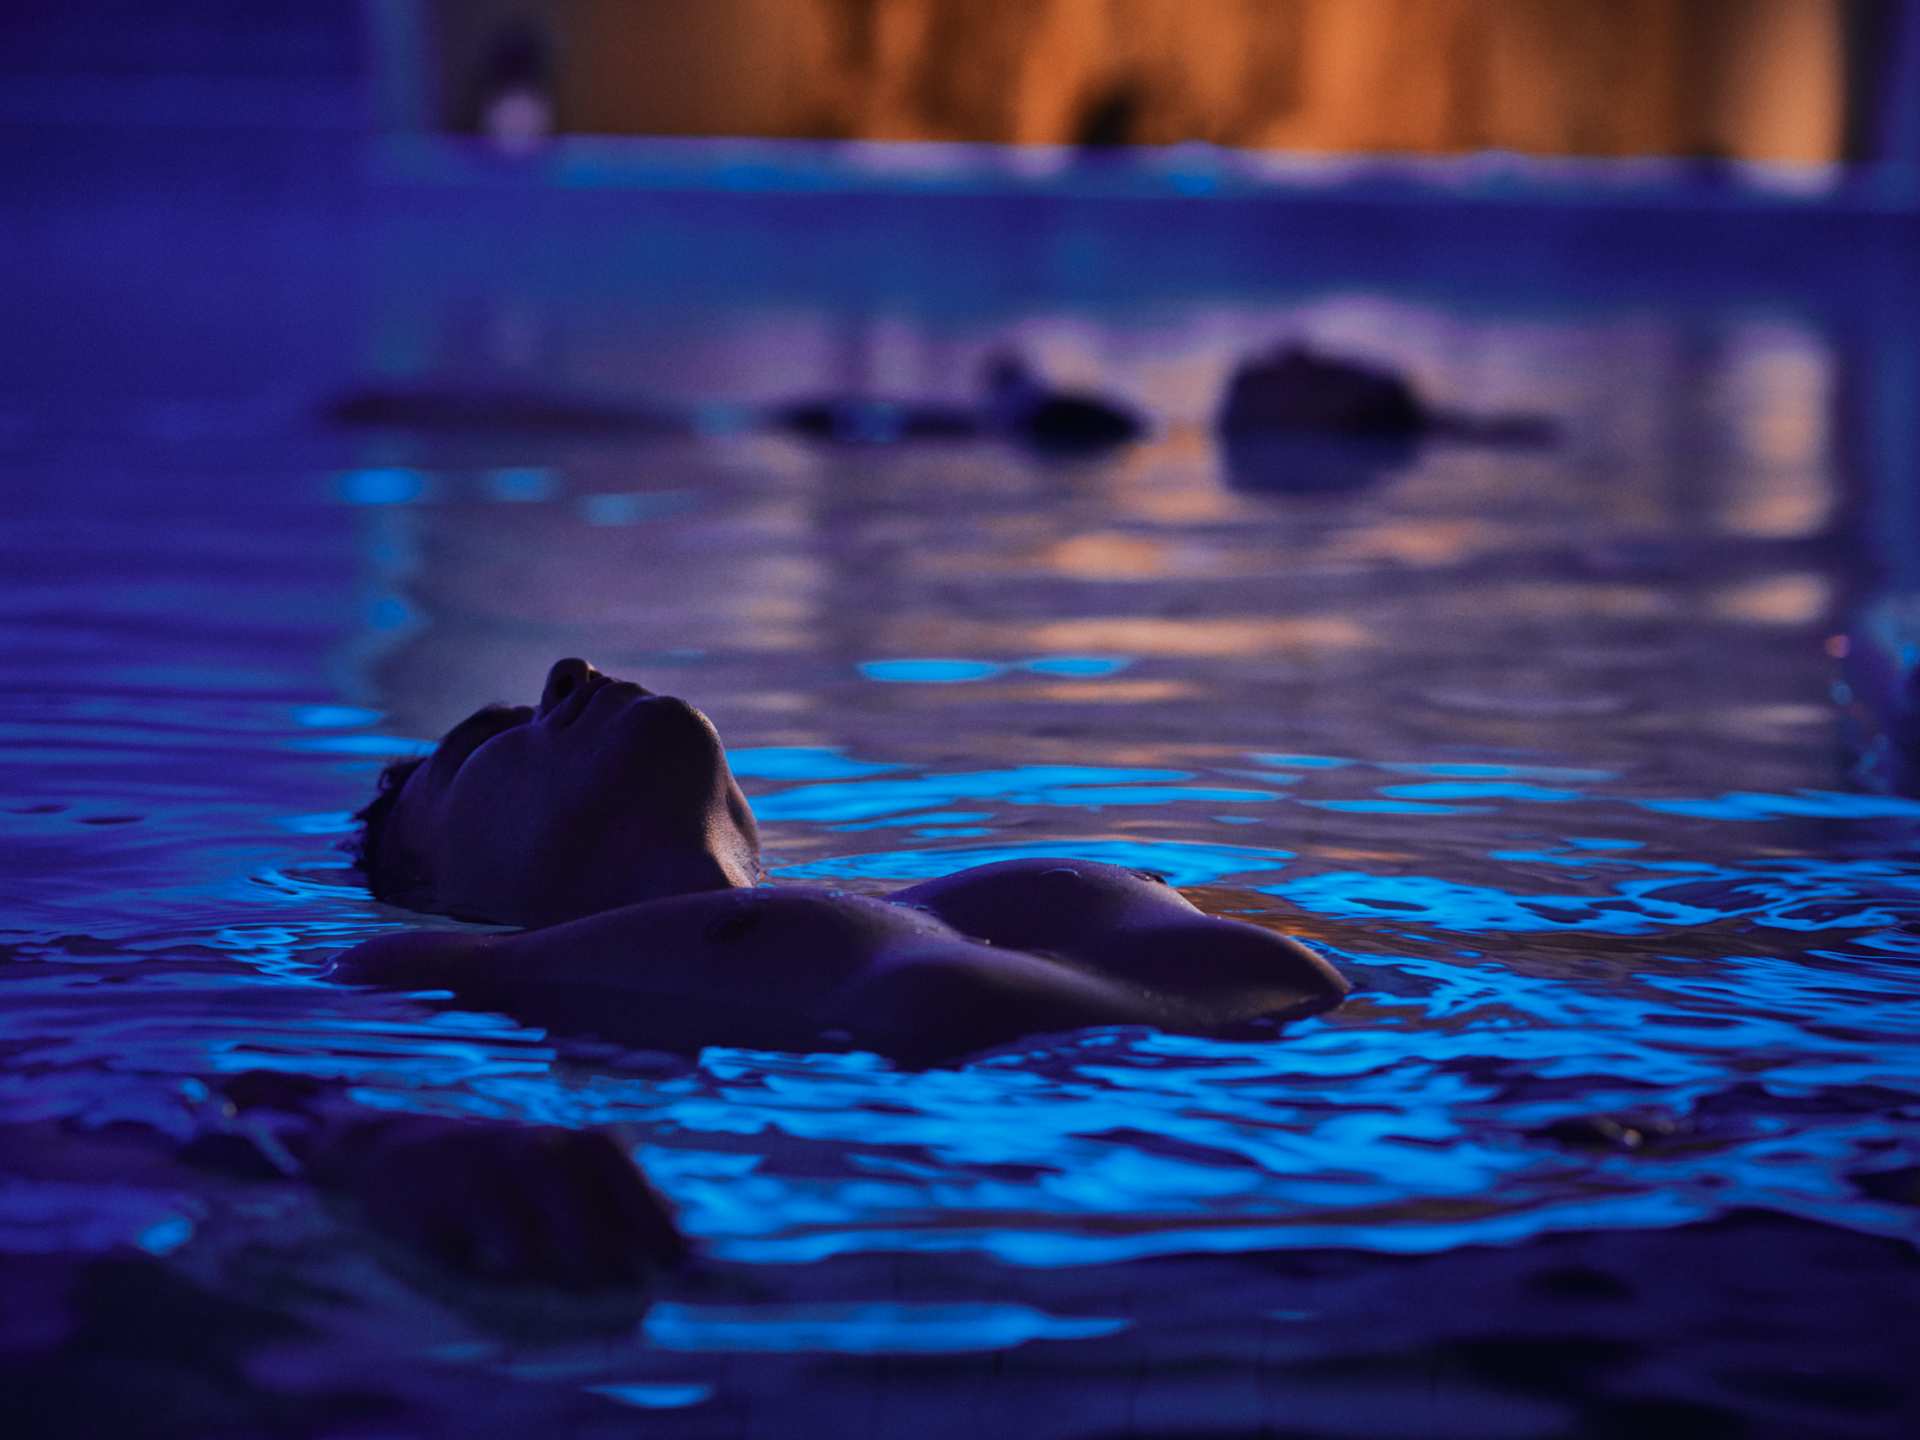 Quebec spas | A person floating in the Kalla experience at Nordik Spa-Nature